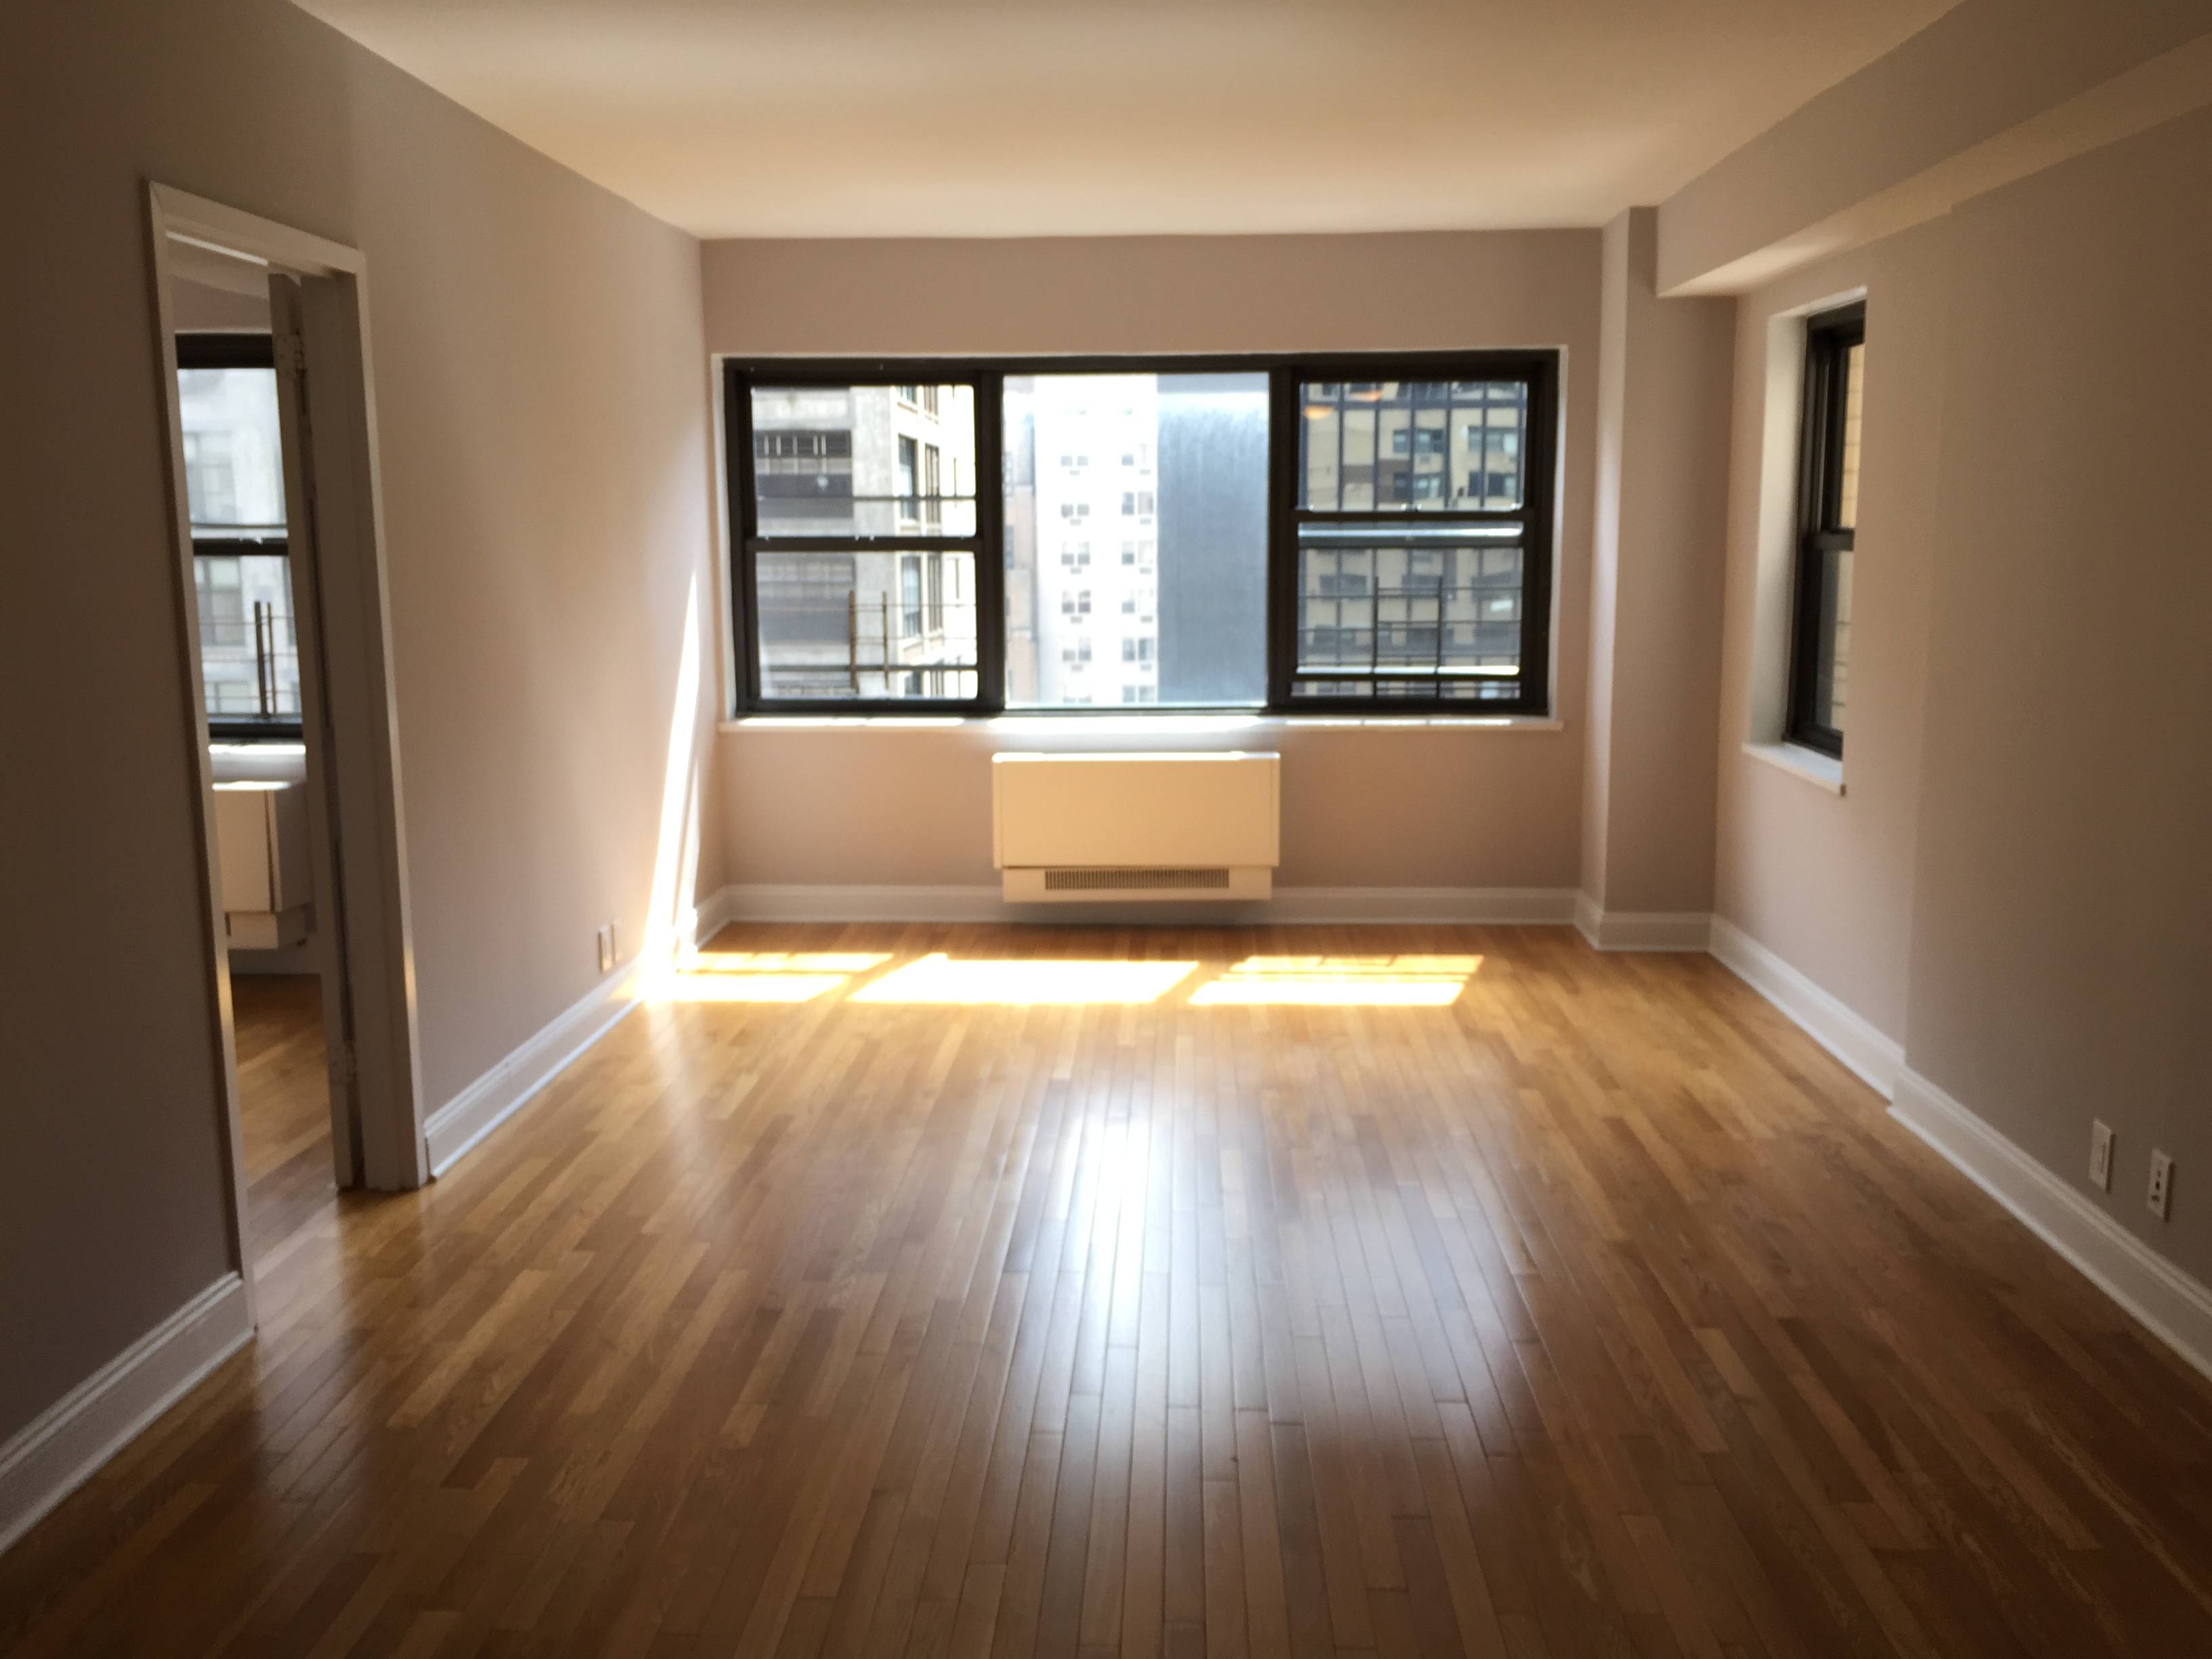 Midtown East MASSIVE 5 Bedroom/3 Bath with Washer/Dryer in Unit - $8,695 & NO FEE!